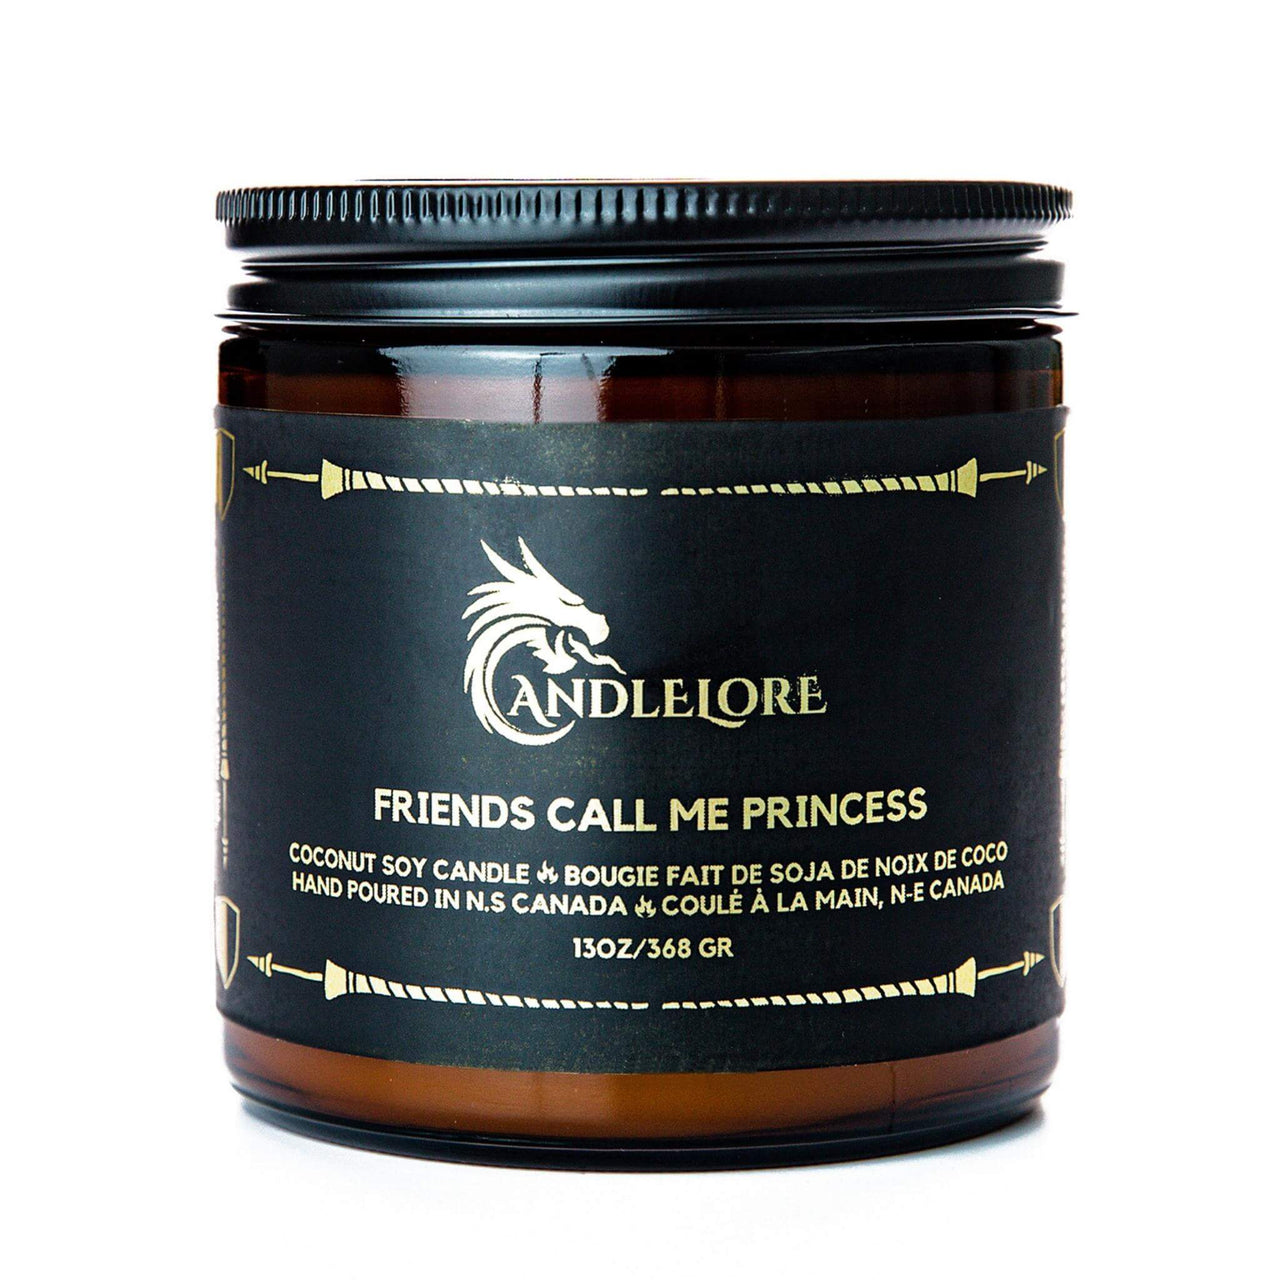 Large Friends Call Me Princess candle on white background